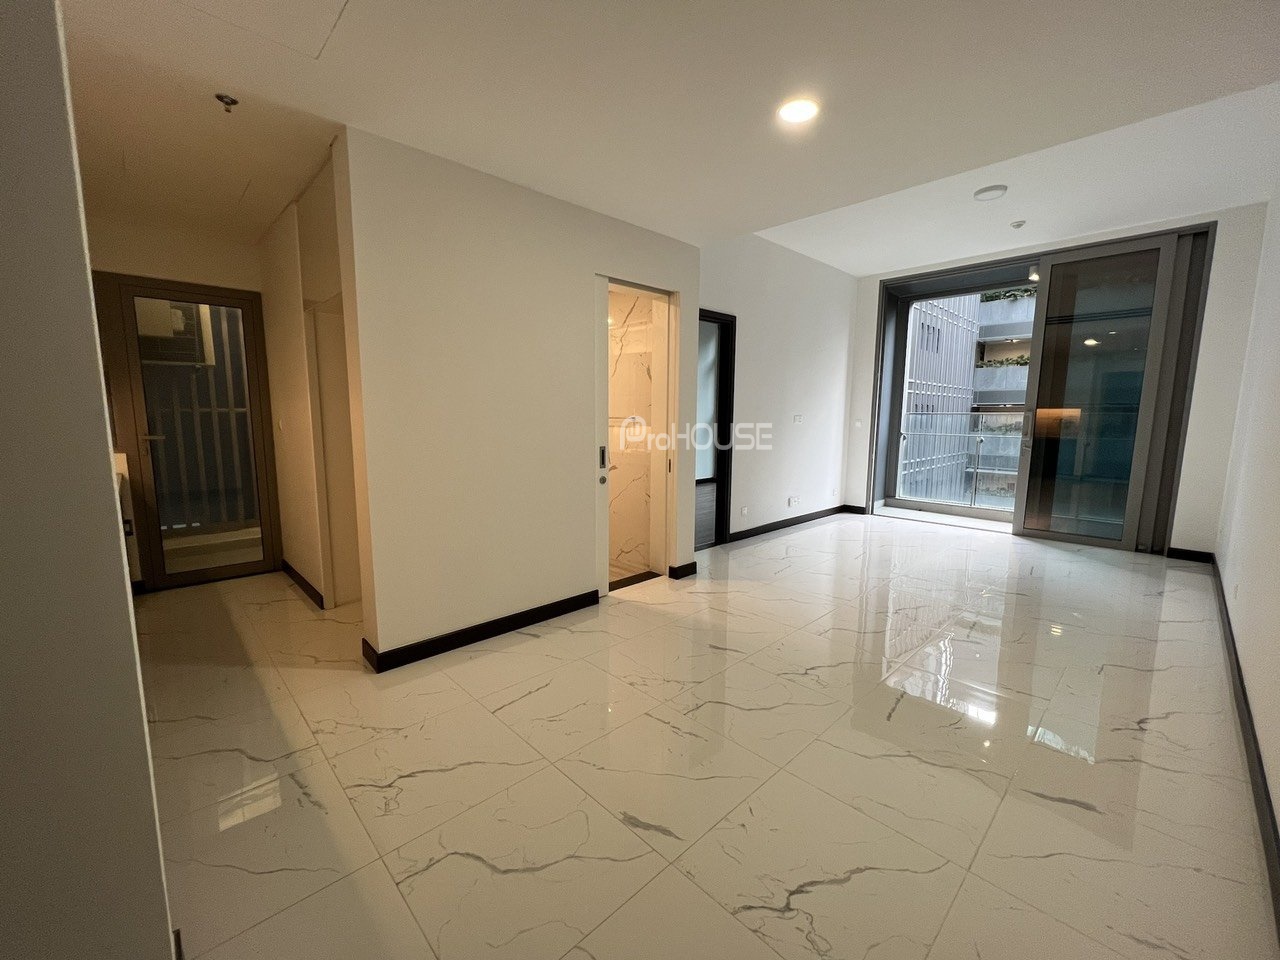 Cheap Empire City apartment for rent with 1 bedroom